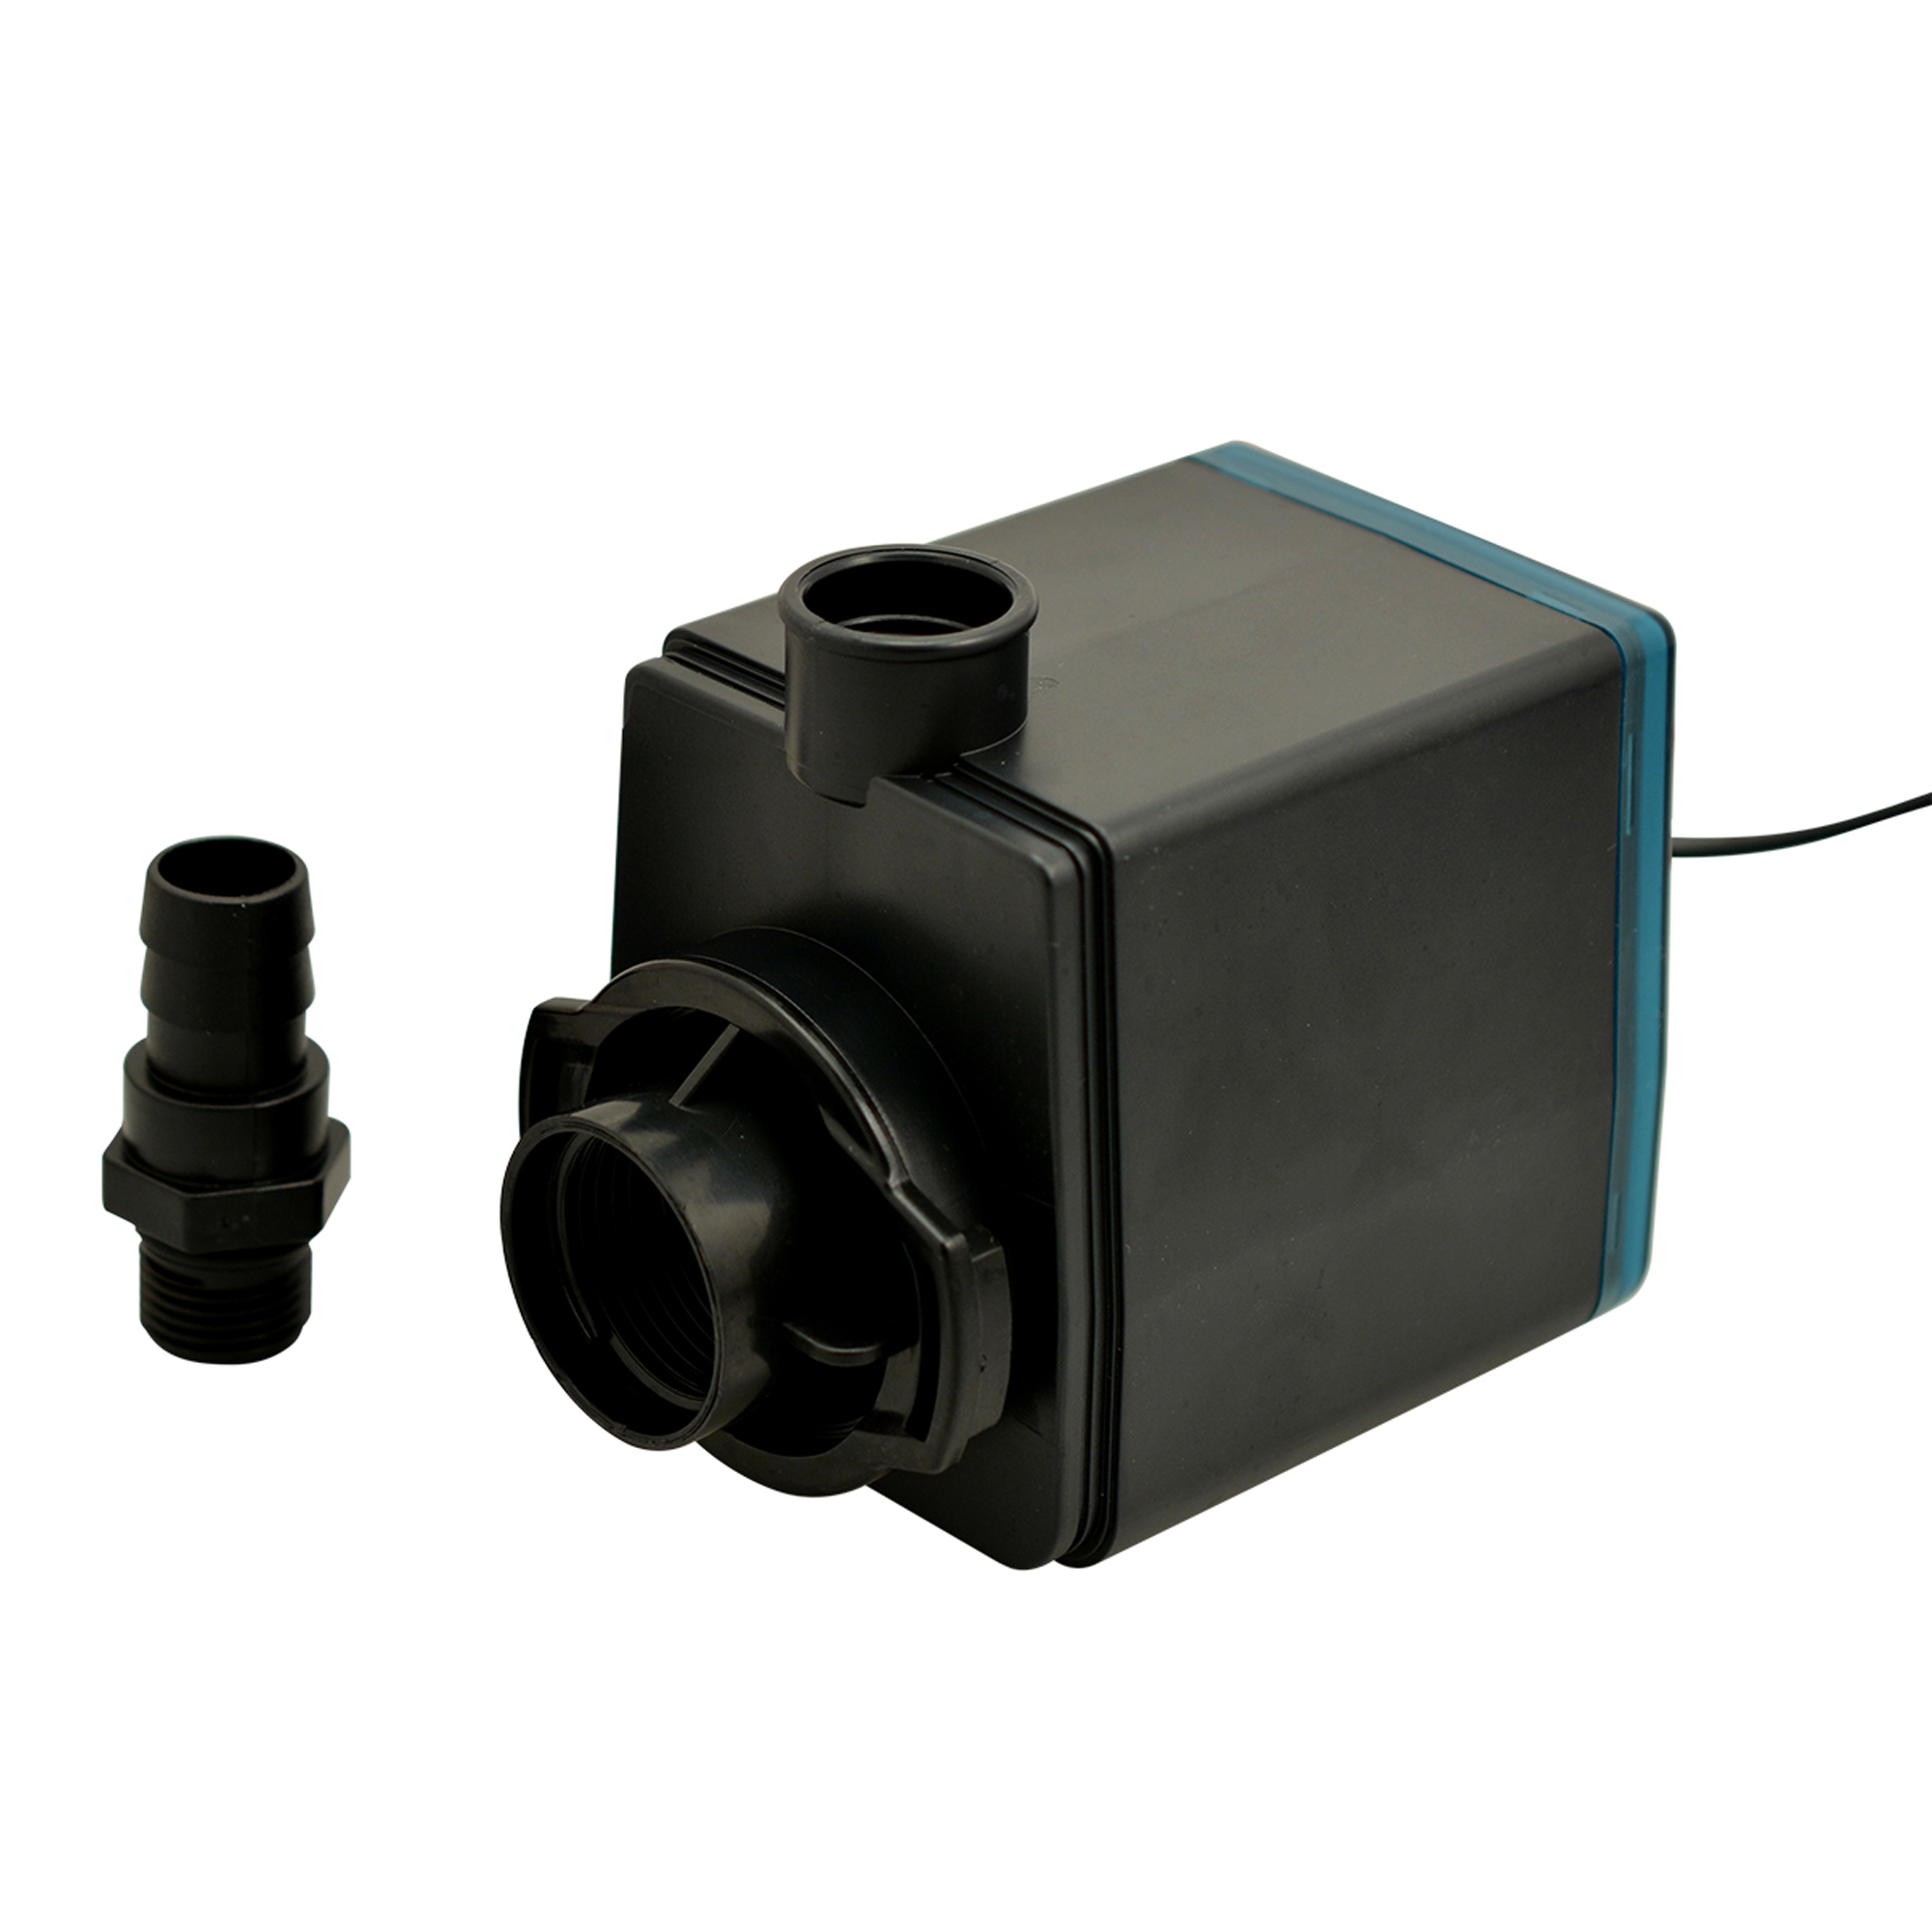 New-Jet 2400 pump for Skimm 2.0 M and L UK